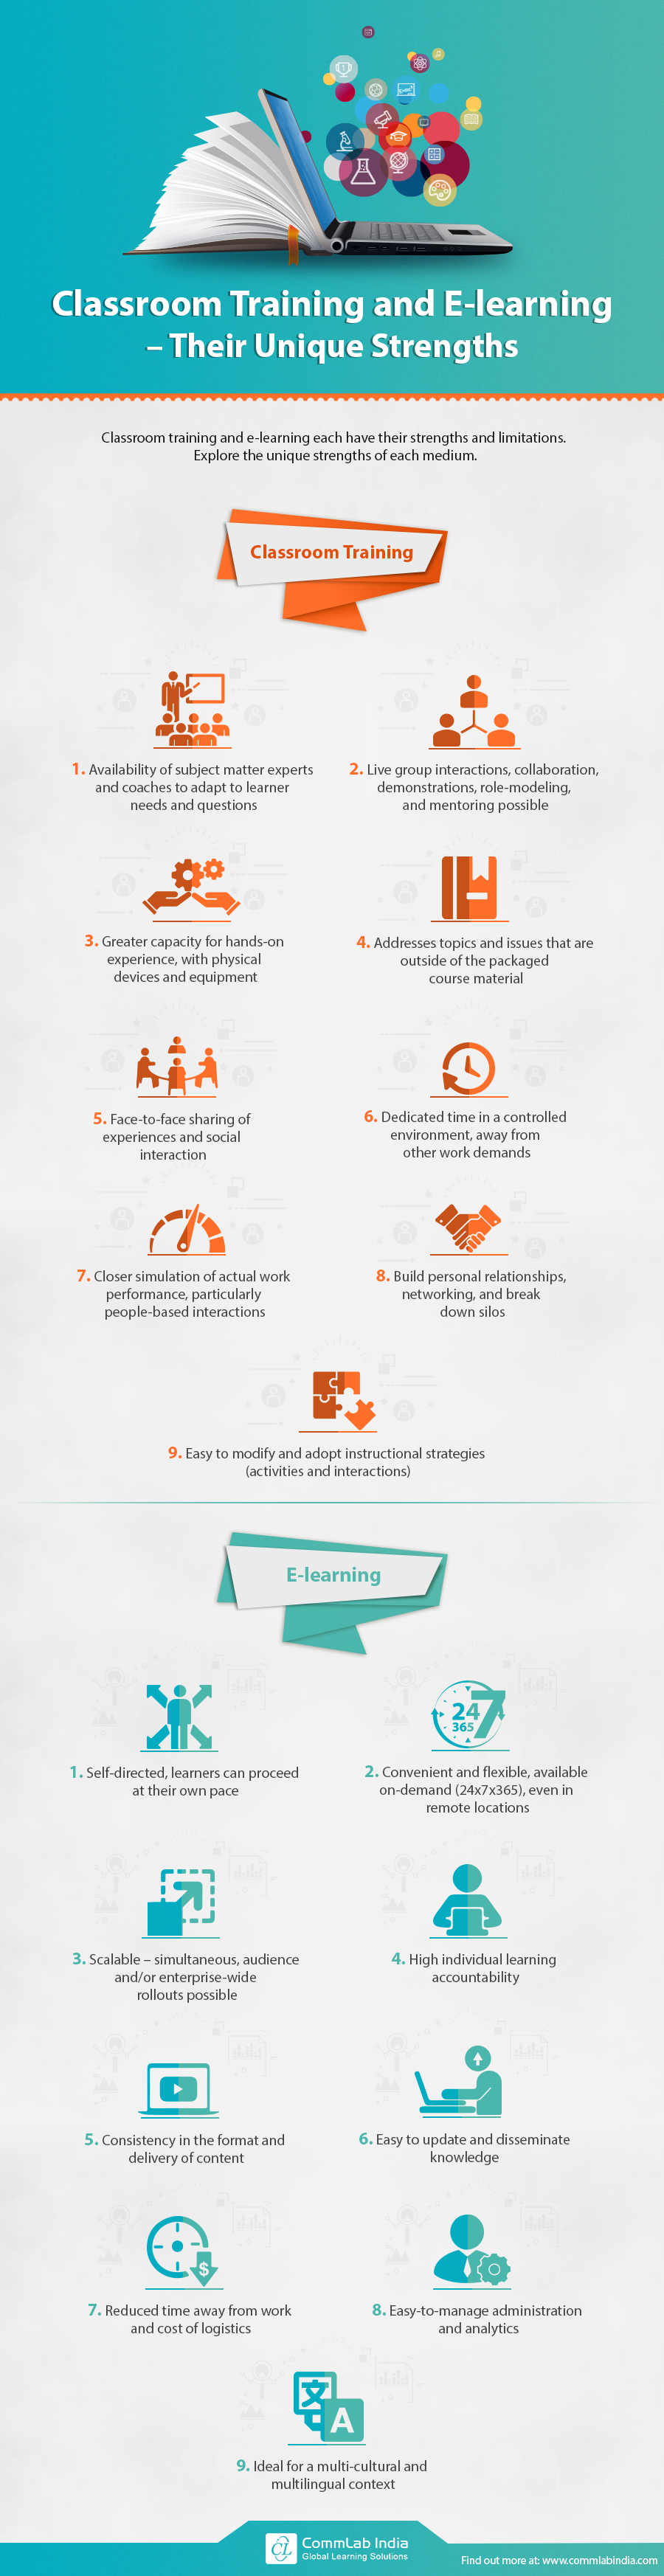 Classroom Training and E-learning - Their Unique Strengths [Infographic]